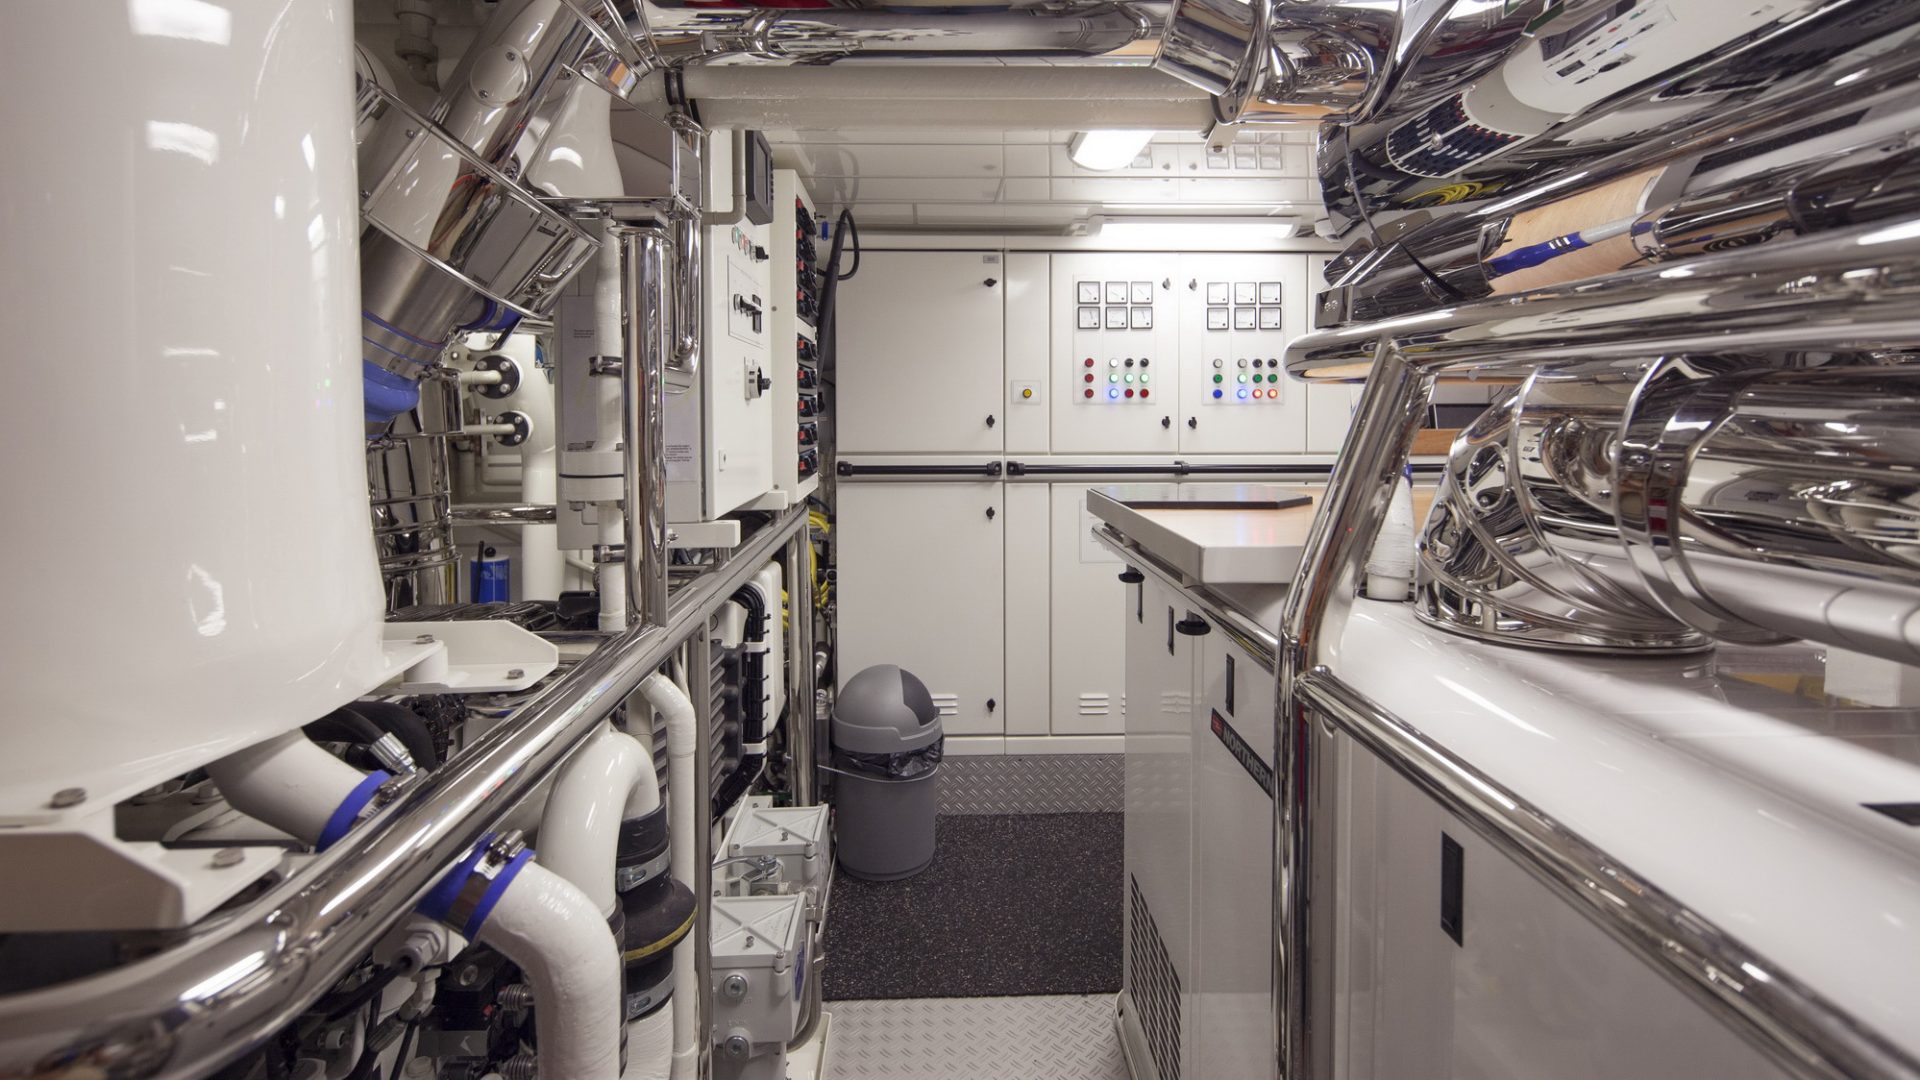 Engine room, Interior of Wisp, a 156 foot (48 meter) sailing yacht built by Royal Huisman and designed by Hoek Design.